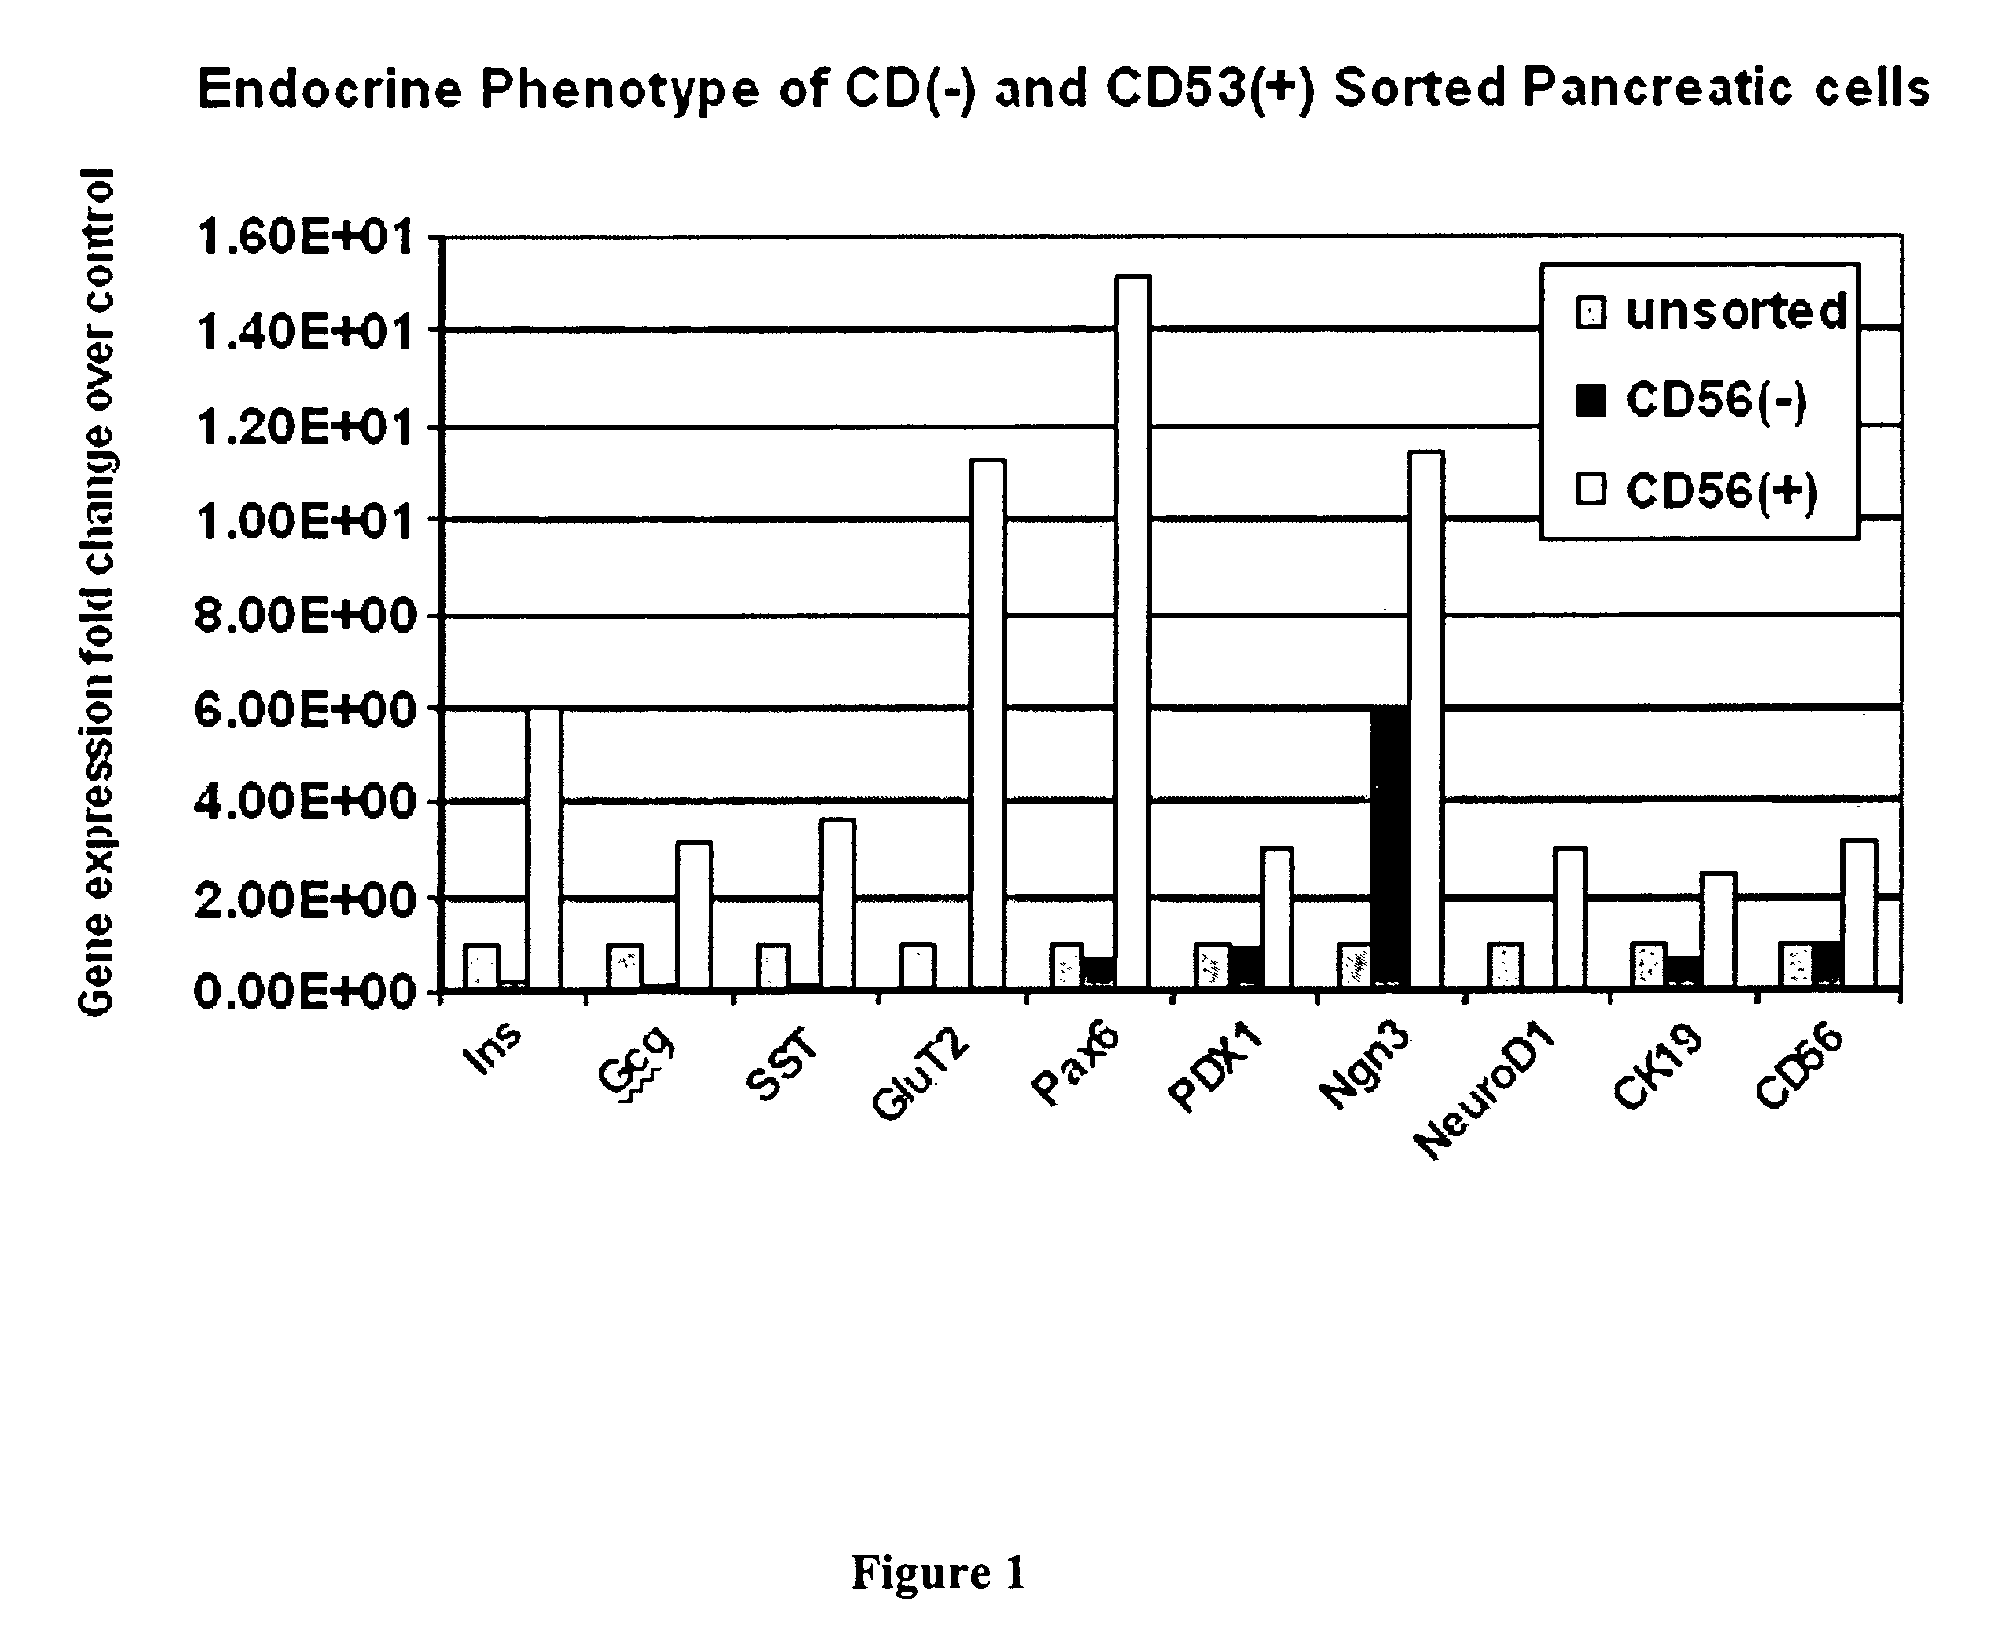 CD56 positive human adult pancreatic endocrine progenitor cells